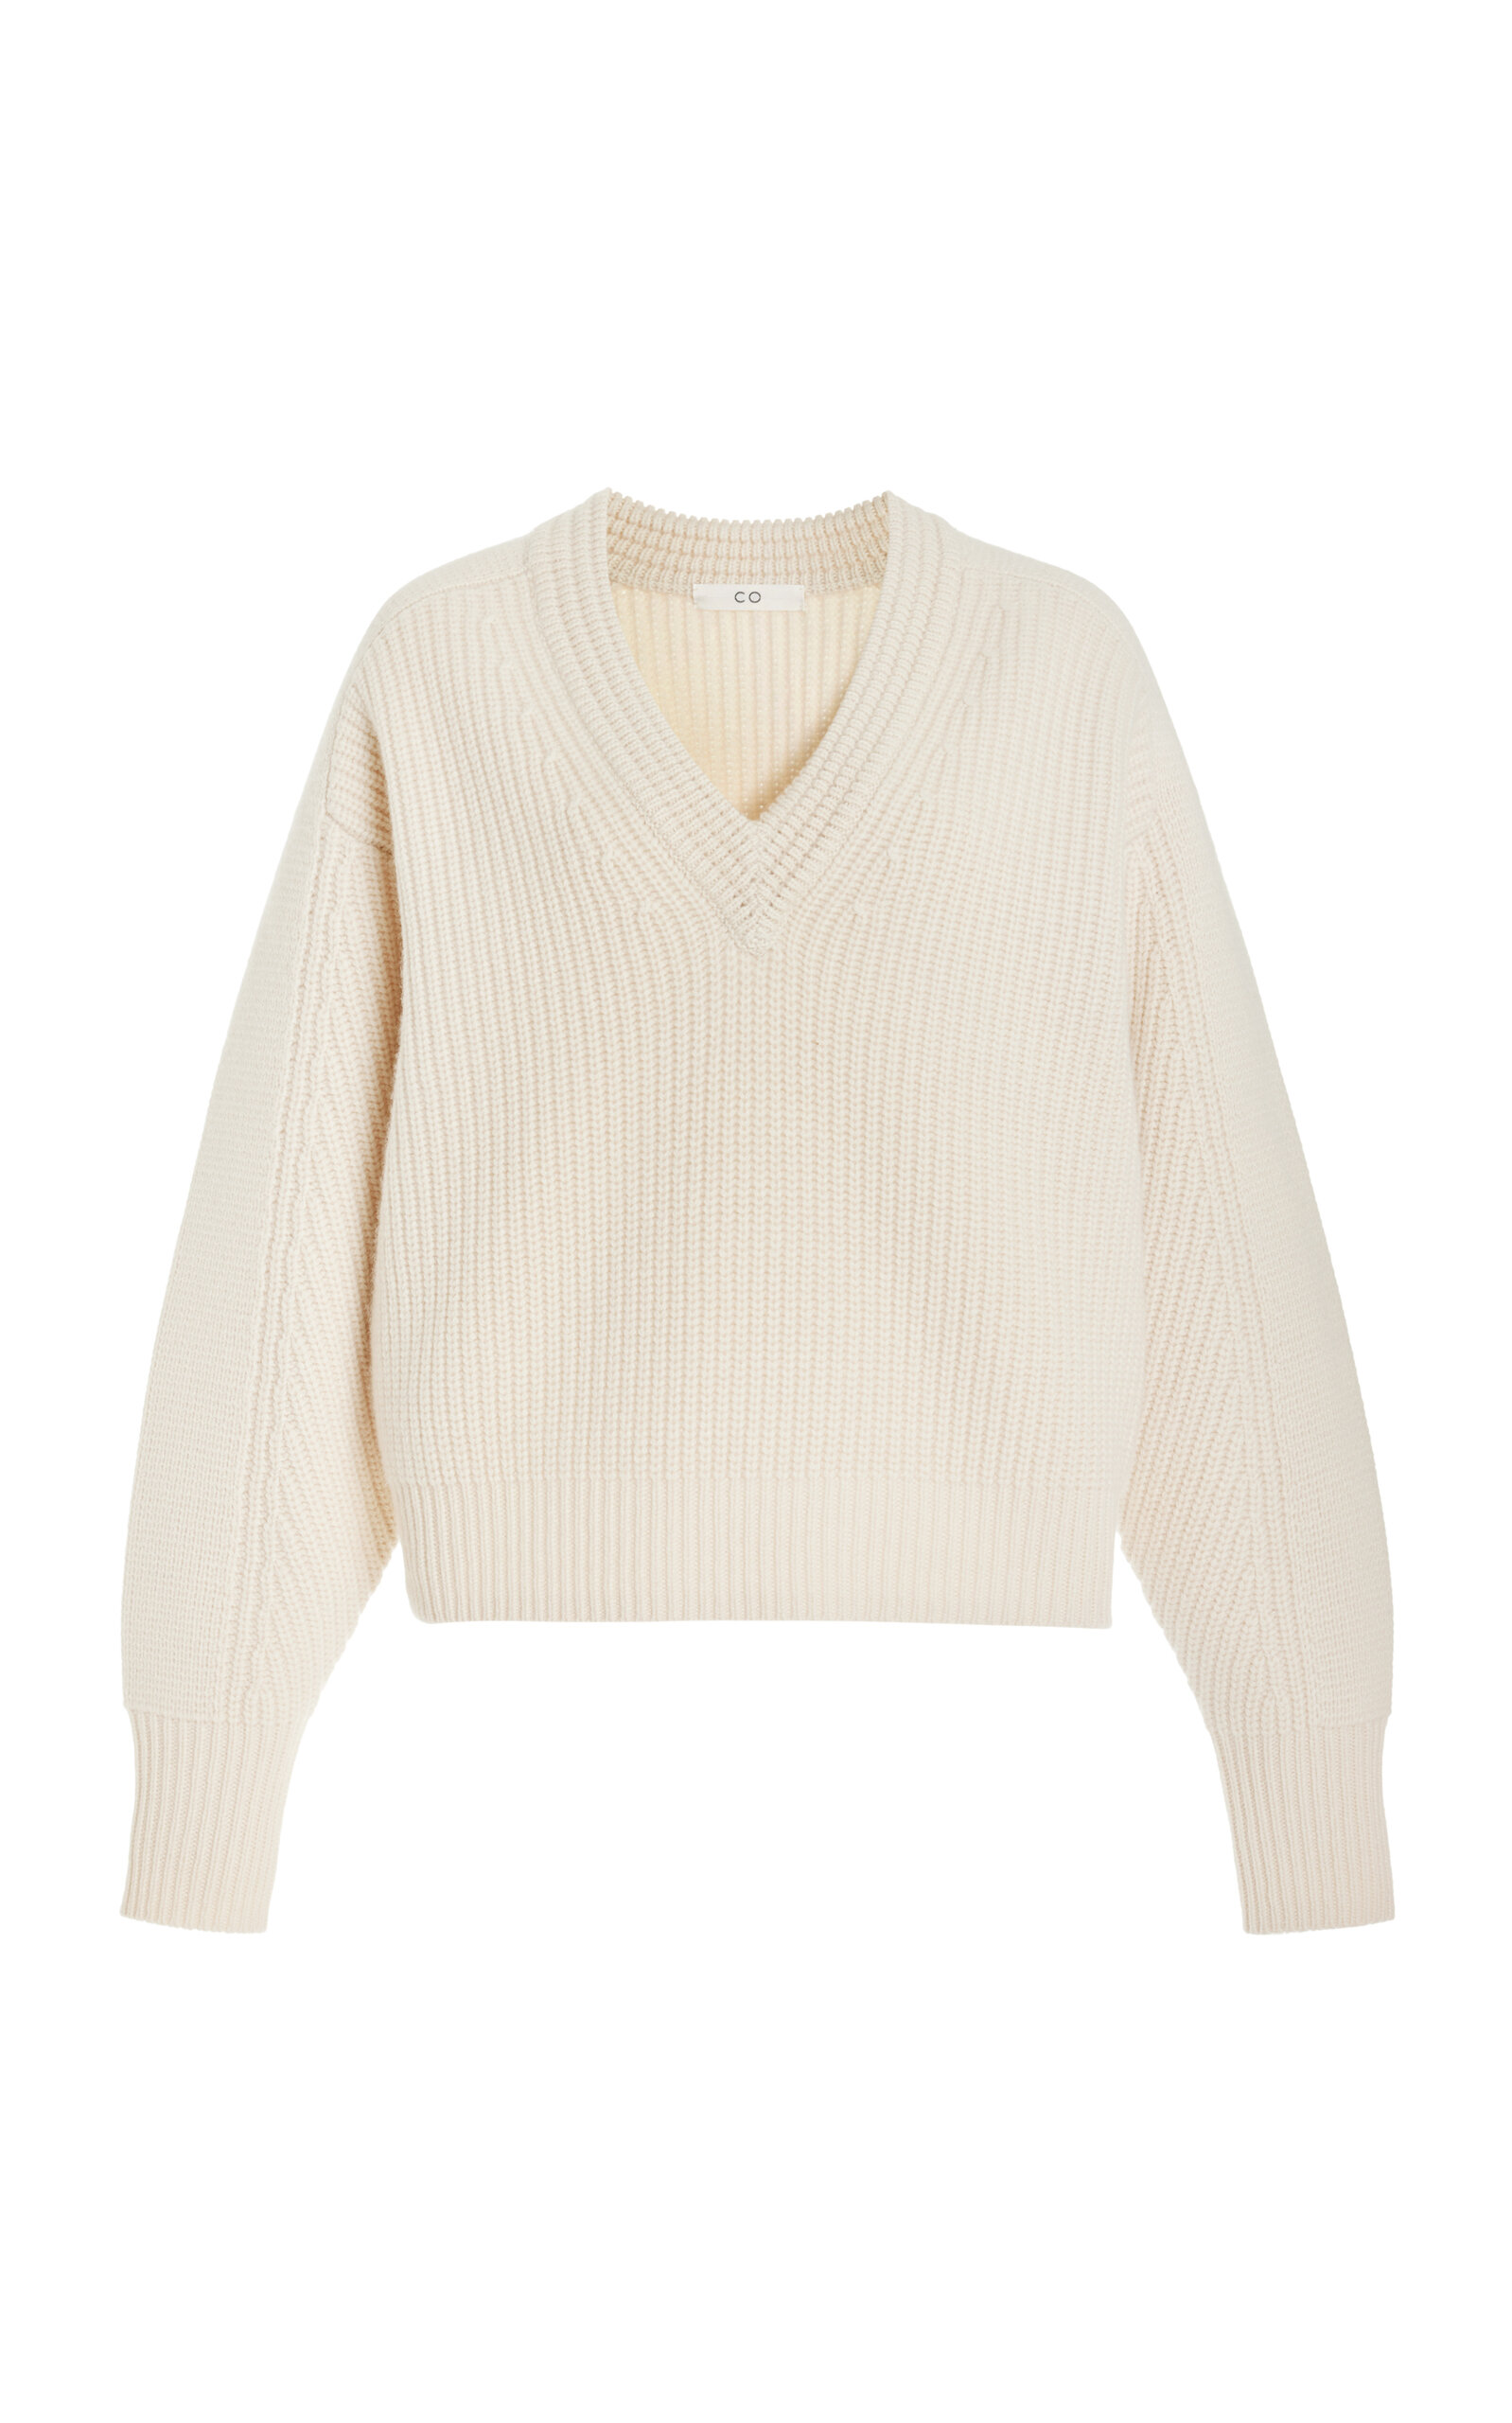 Co Cashmere Jumper In Ivory